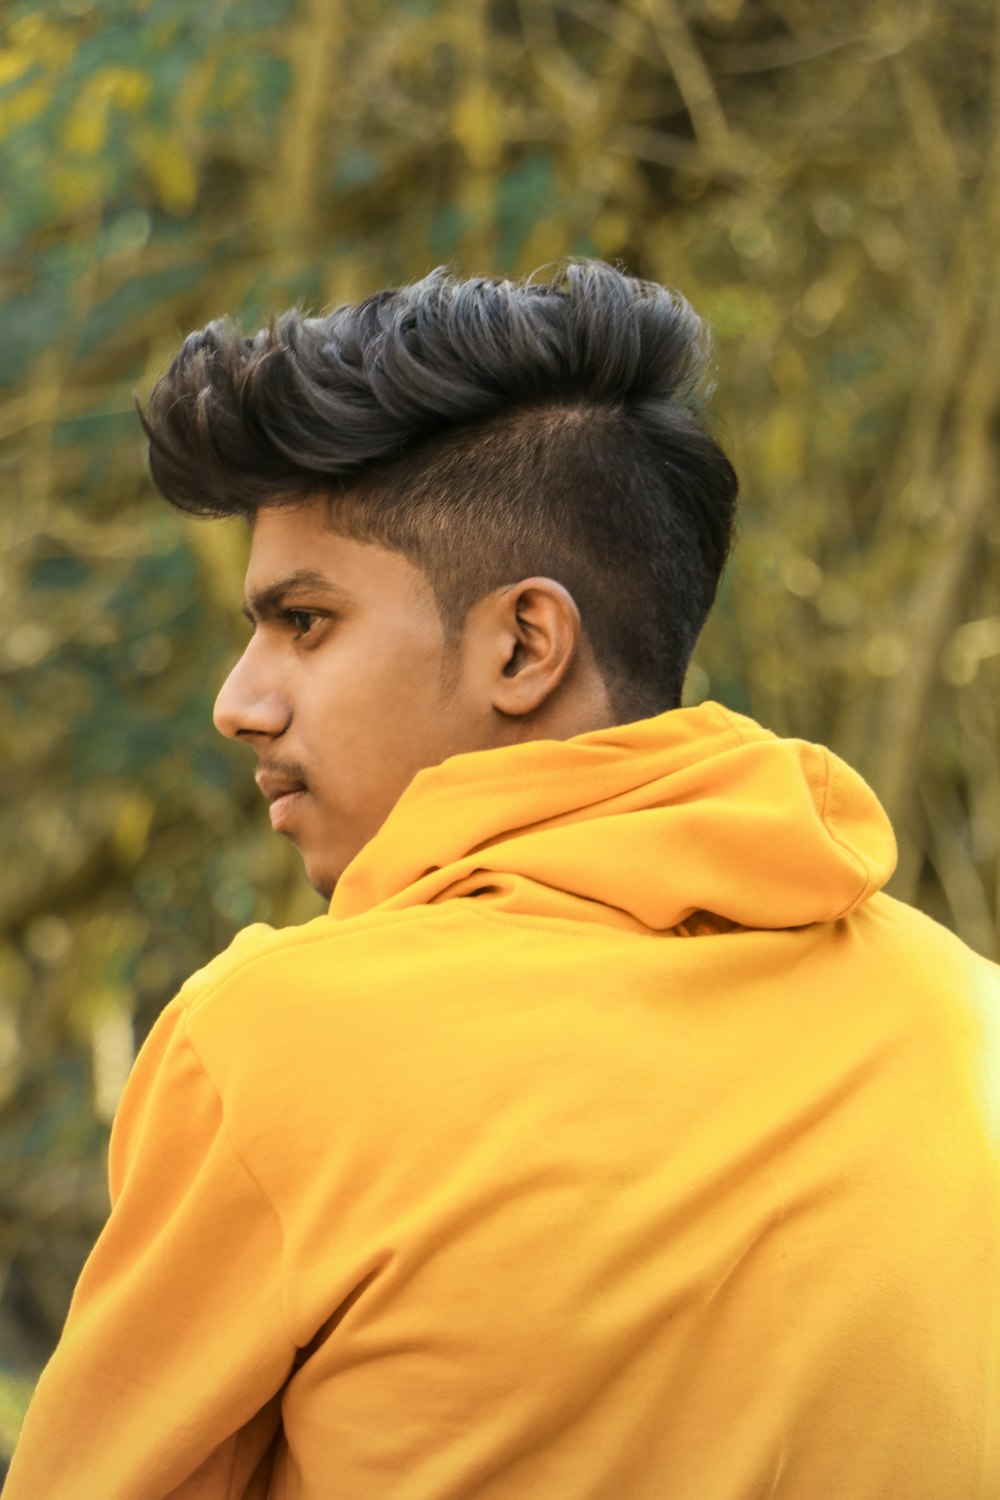 500+ Indian Boy Pictures | Download Free Images on Unsplash